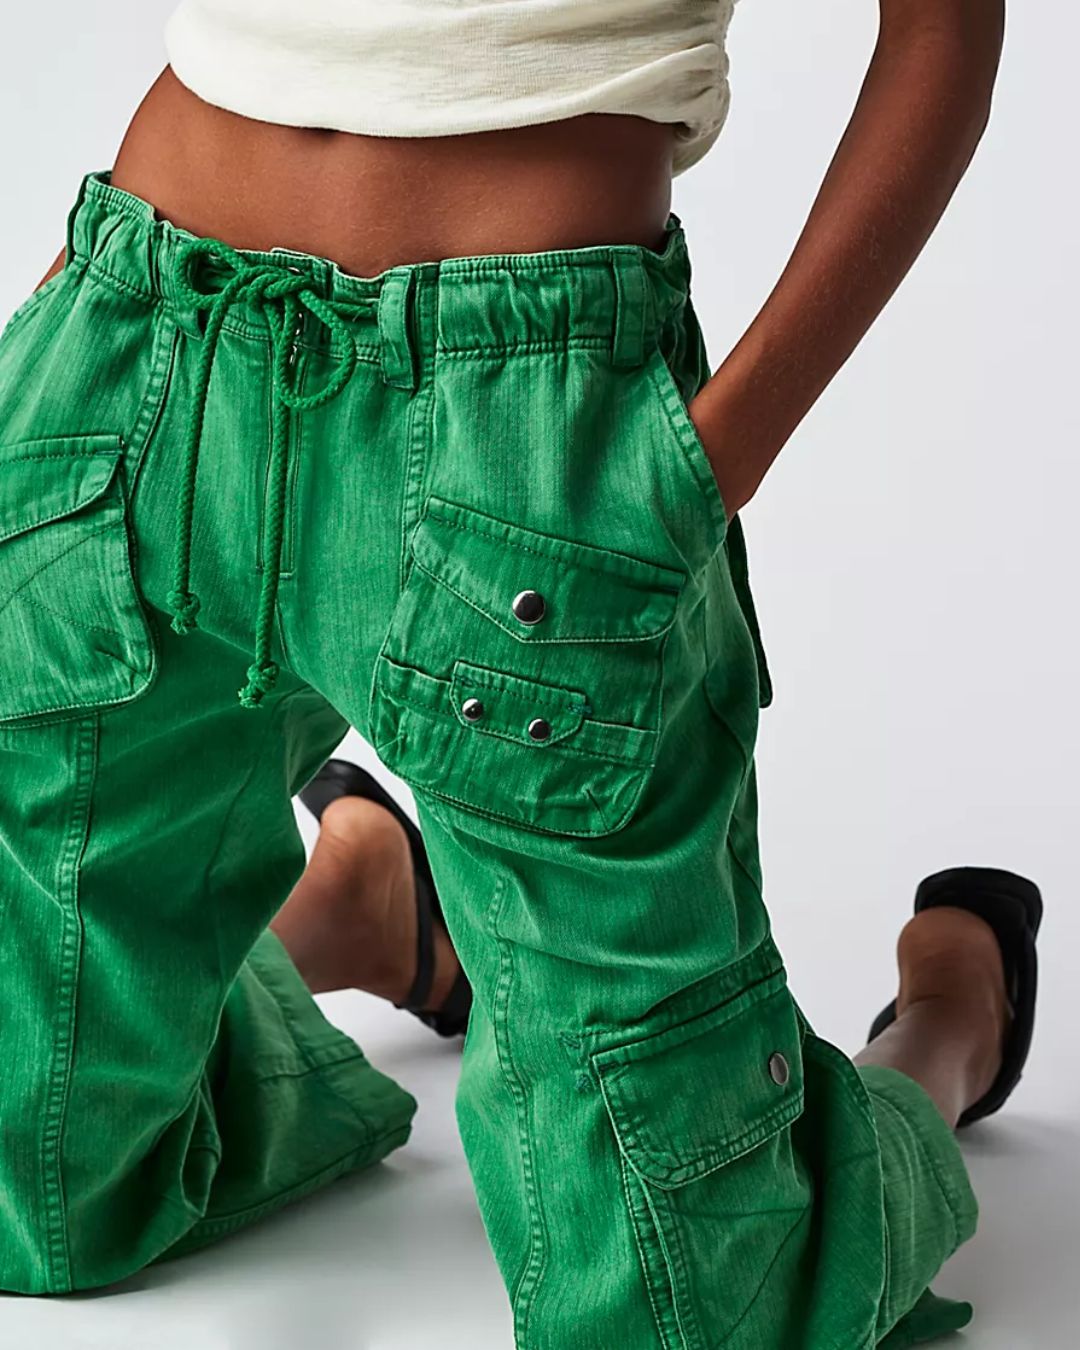 flap-pocket-cargo-green,FLAP-POCKET CARGO,Color: Green
Fabric: Cotton
Fit: Relaxed Fit 
Type: Wide Leg
Length: Ankle Length(36 in)
Waist: Low Rise
Closure: Button & Zipper
No. of Pockets: 9
Print: Solid,bottomwear,cargos,casual,streetwear,woven,cotton,green,flap pocket, multi pocket,relaxed fit,wide leg,ankle length,low rise